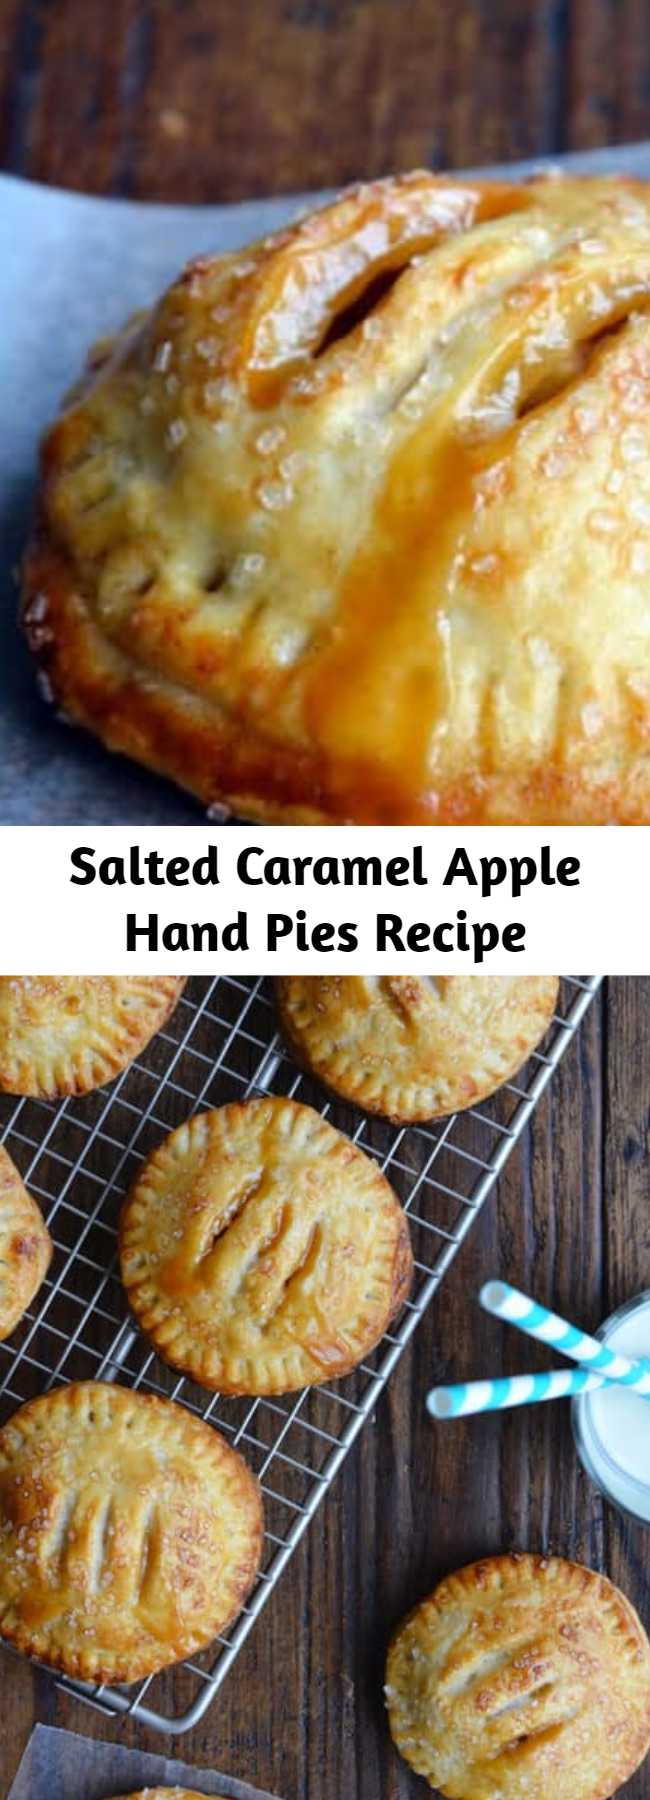 Salted Caramel Apple Hand Pies Recipe - A pinch of sea salt lends a savory balance to these handheld treats that ooze fresh fruit flavor and silky smooth caramel. It’s the dynamic dessert duo, and it’s all wrapped up in finger-friendly package. No forks, no plates, no sharing required!